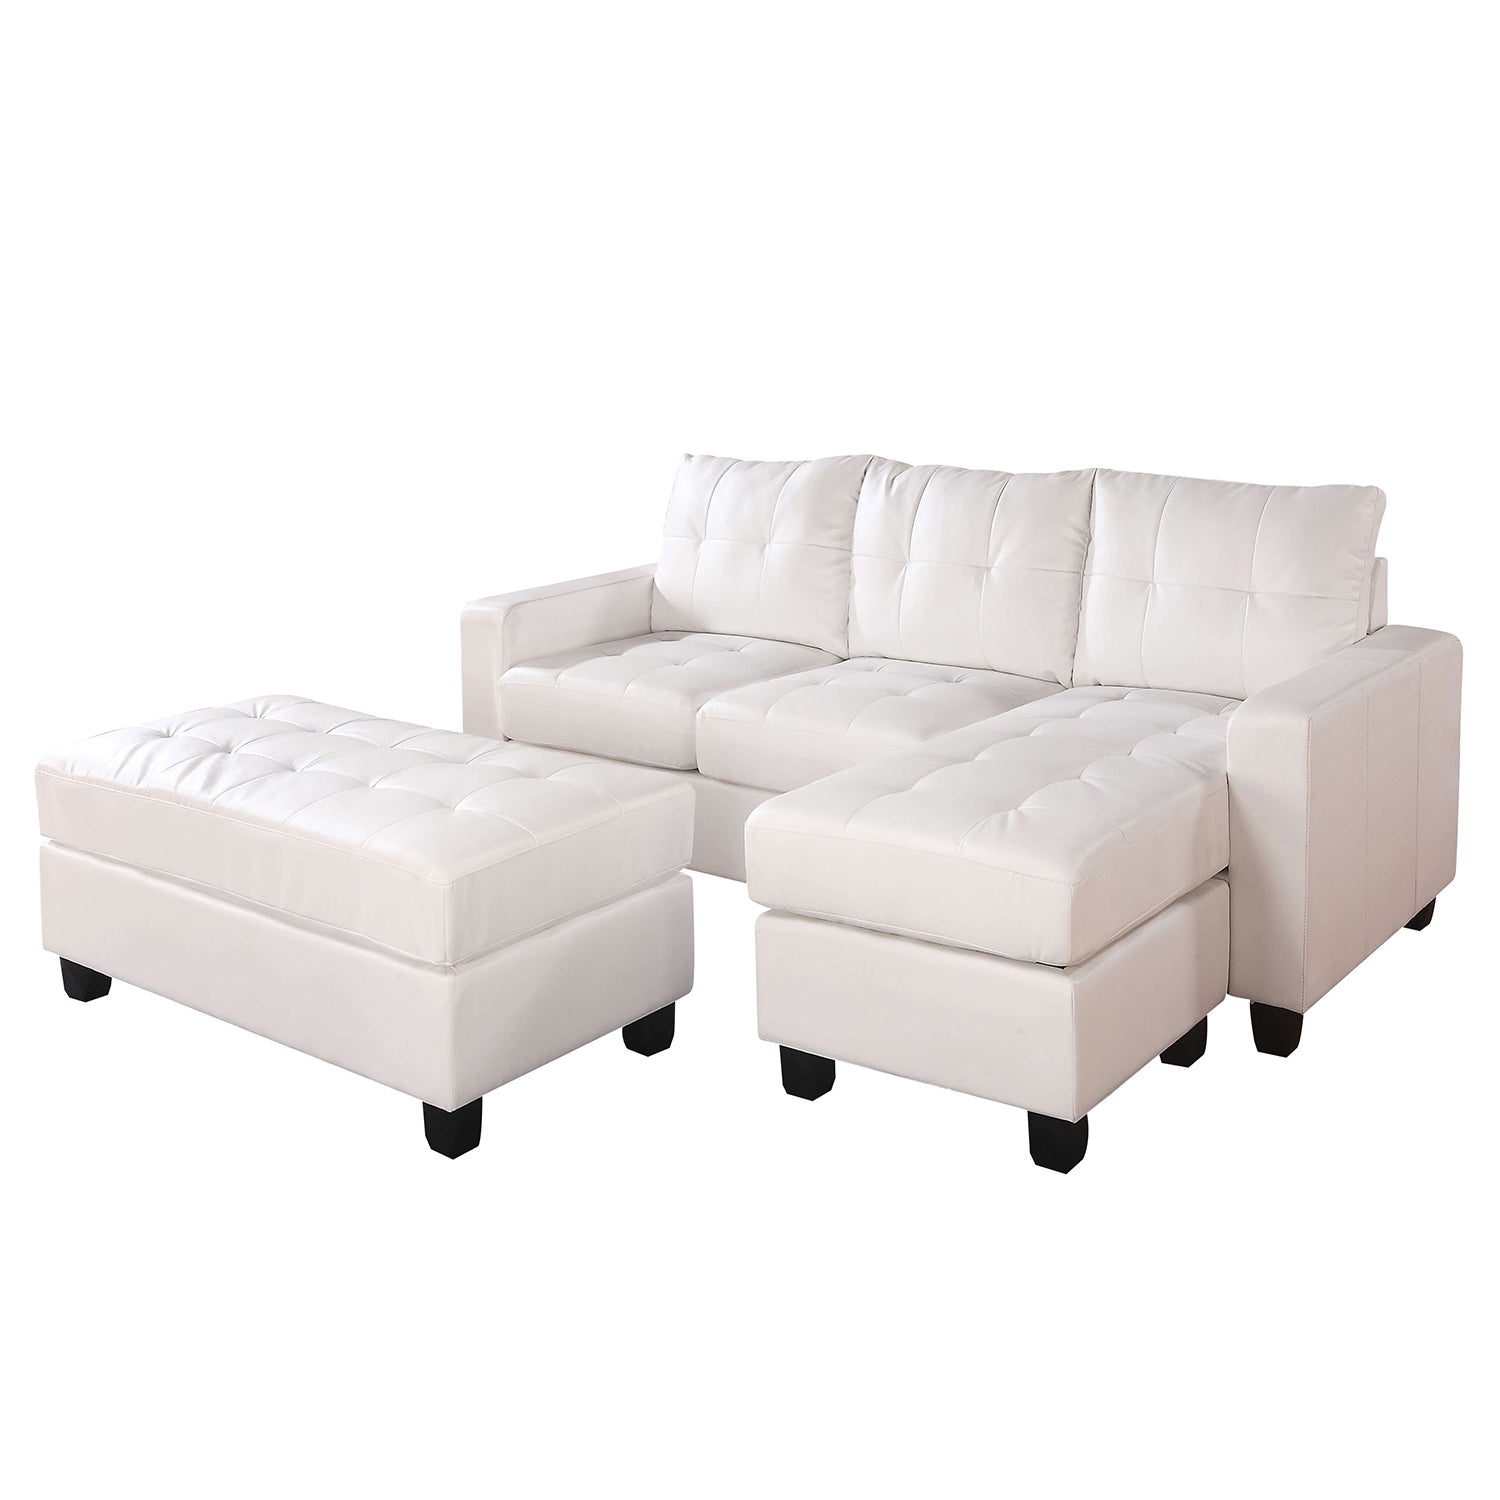 83' X 57' X 35' White Bonded Leather Match Sectional Sofa With Ottoman